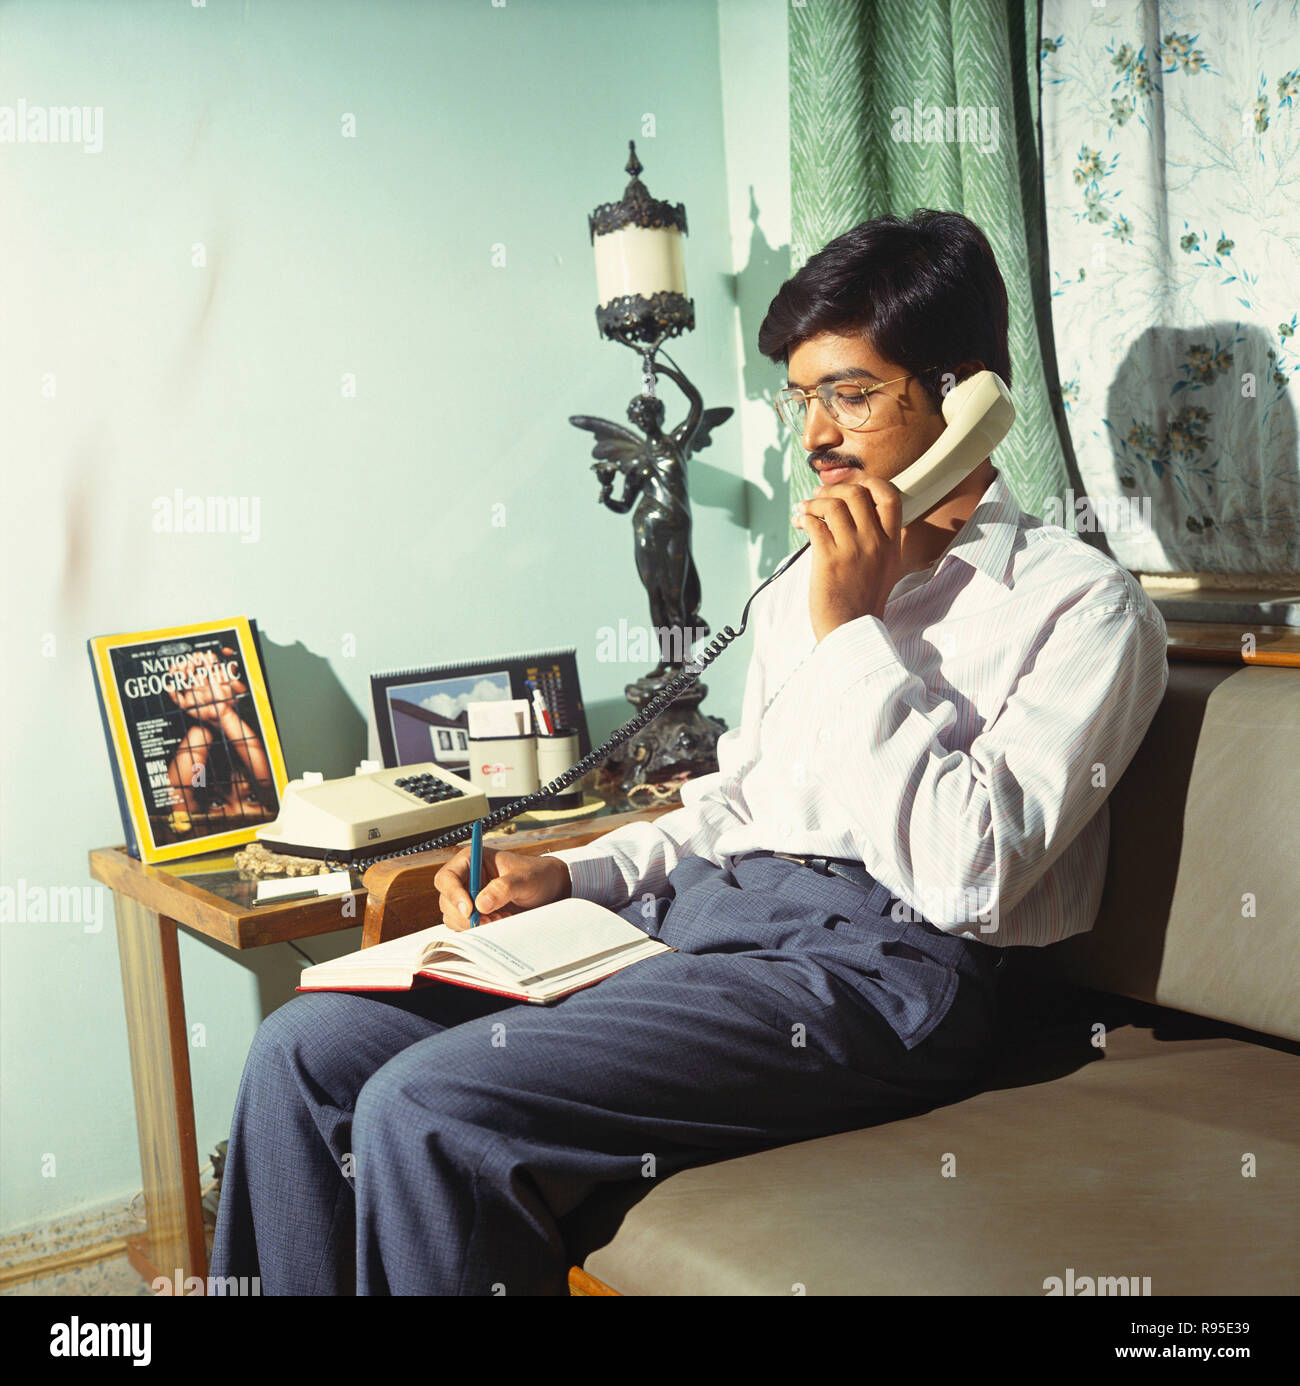 Man Holding Telephone and Writing on Book Stock Photo